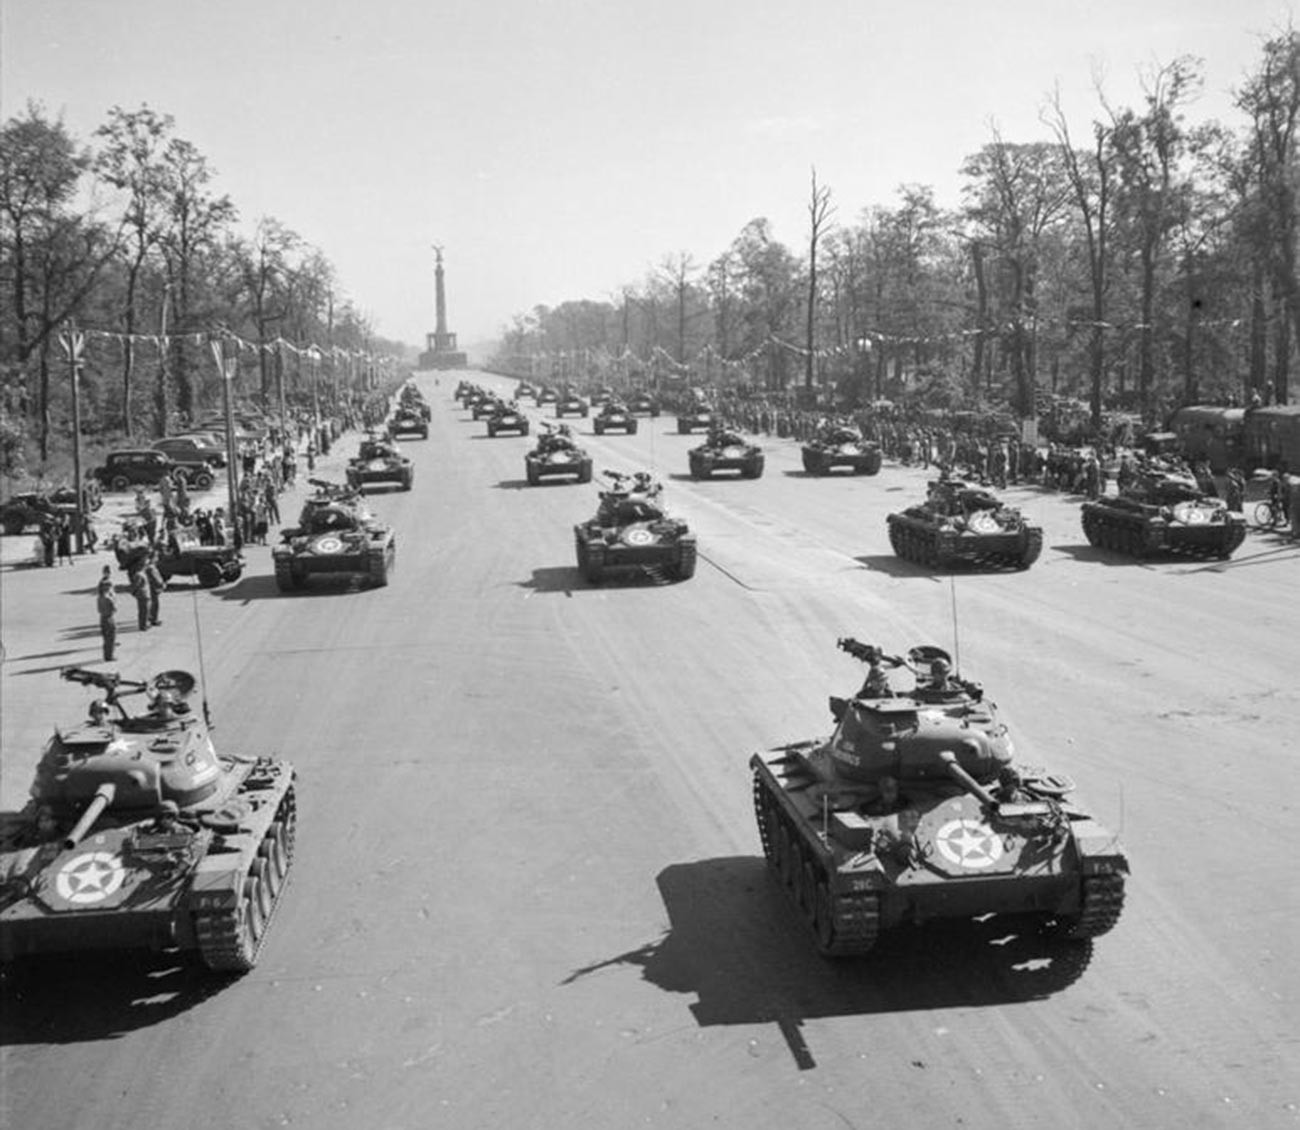 American M24 'Chaffee' Light Tanks during the parade, September 7.